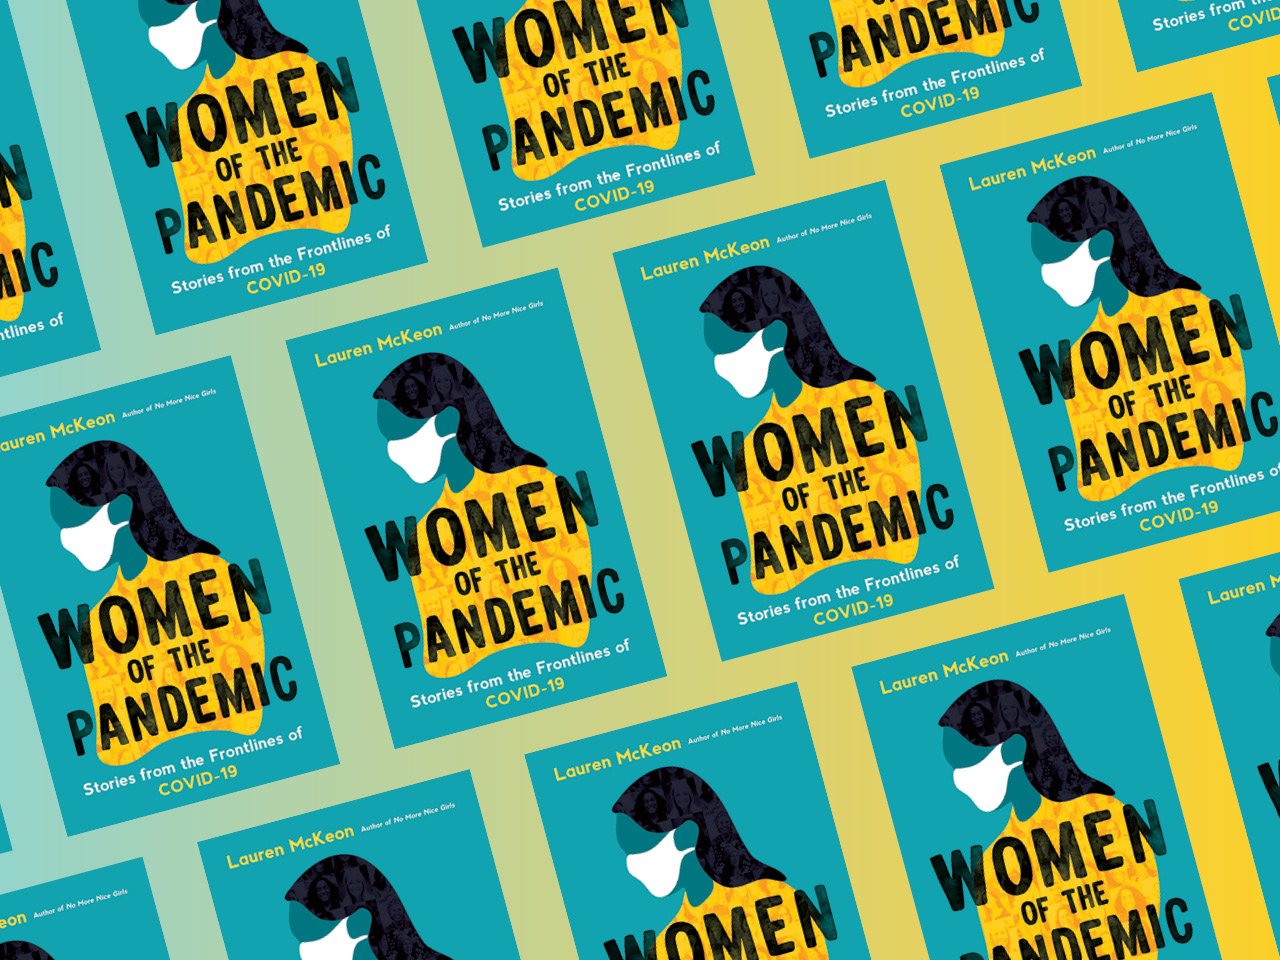 The cover of the book Women of the Pandemic